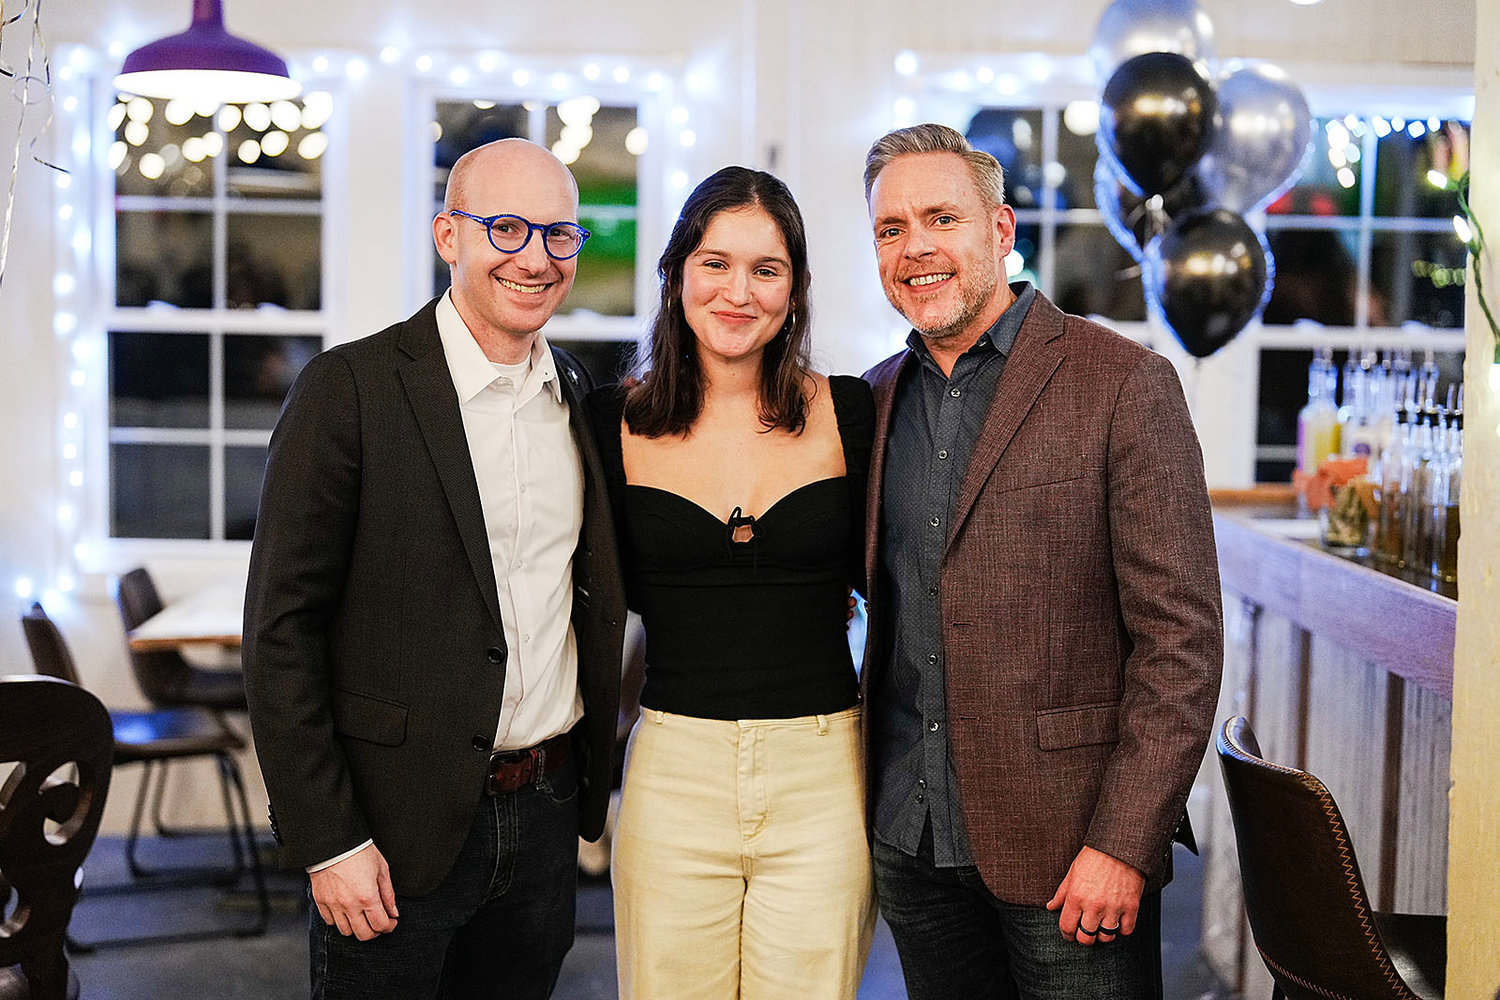 Adam Greenman, Alliance president and CEO, Emma Newbery, podcast producer, and Brian Sullivan, Alliance chief content officer, at the launch celebration for "Breaking the Glass."